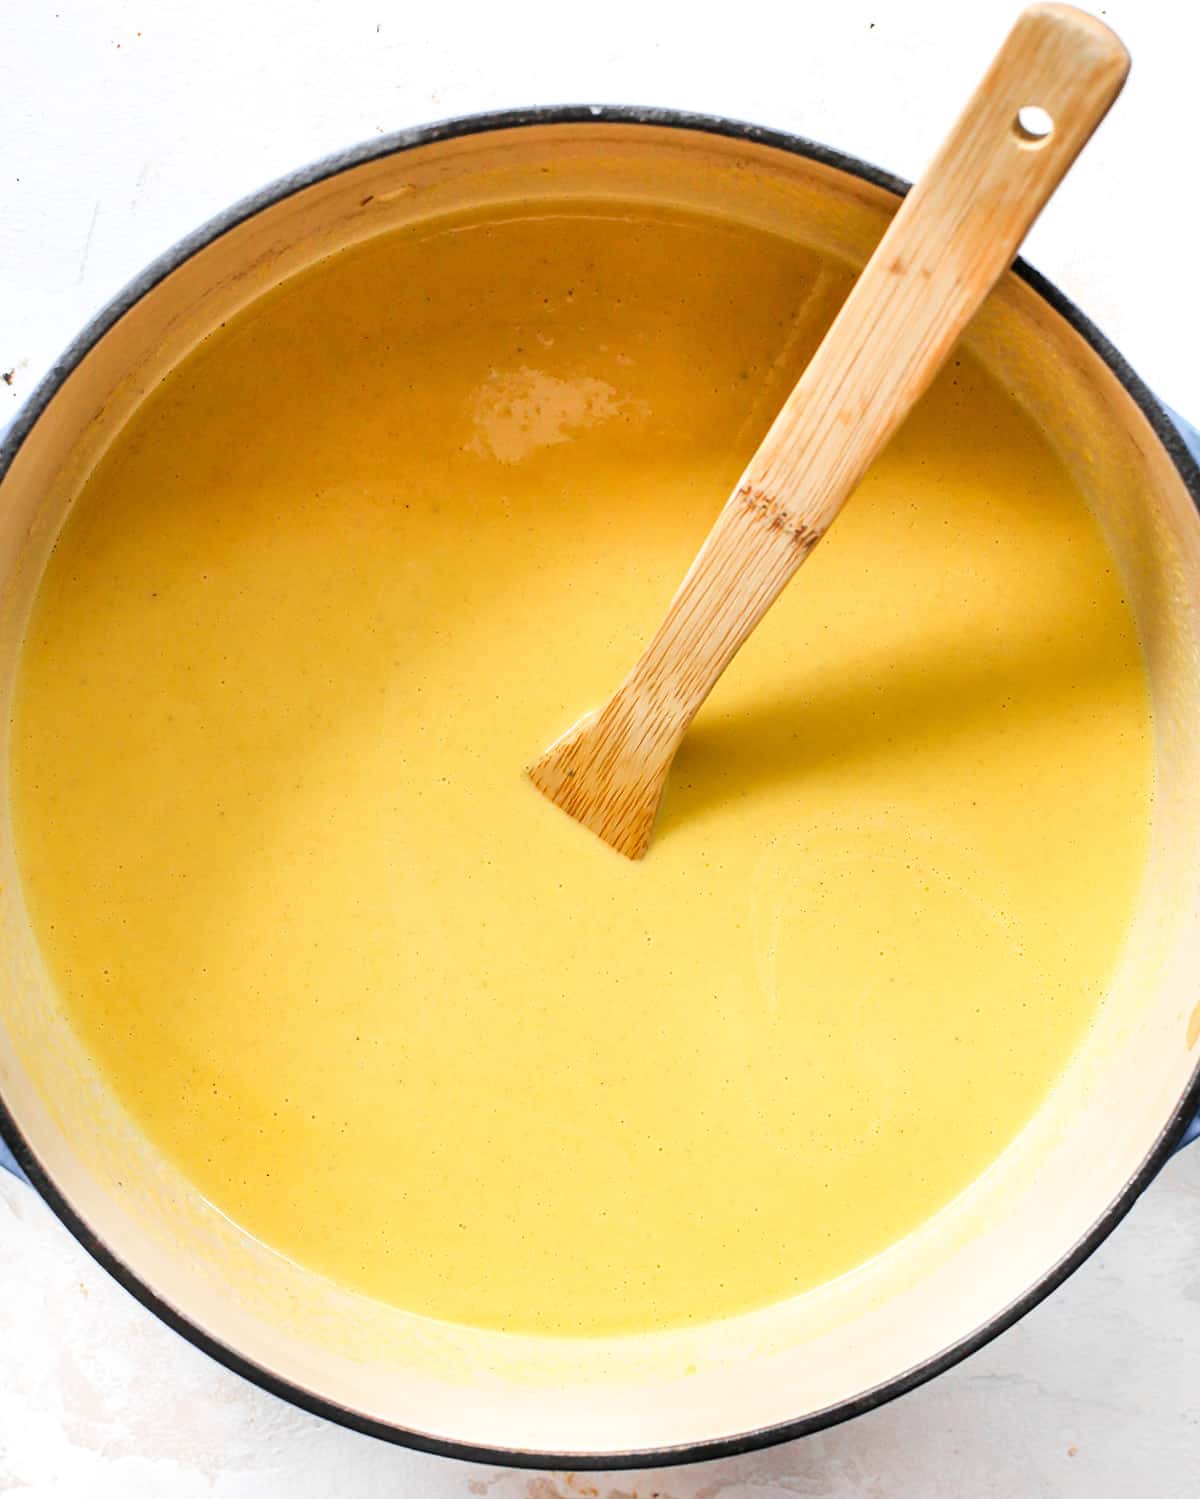 How to Make Butternut Squash Soup finished soup in a pot with a wooden spoon